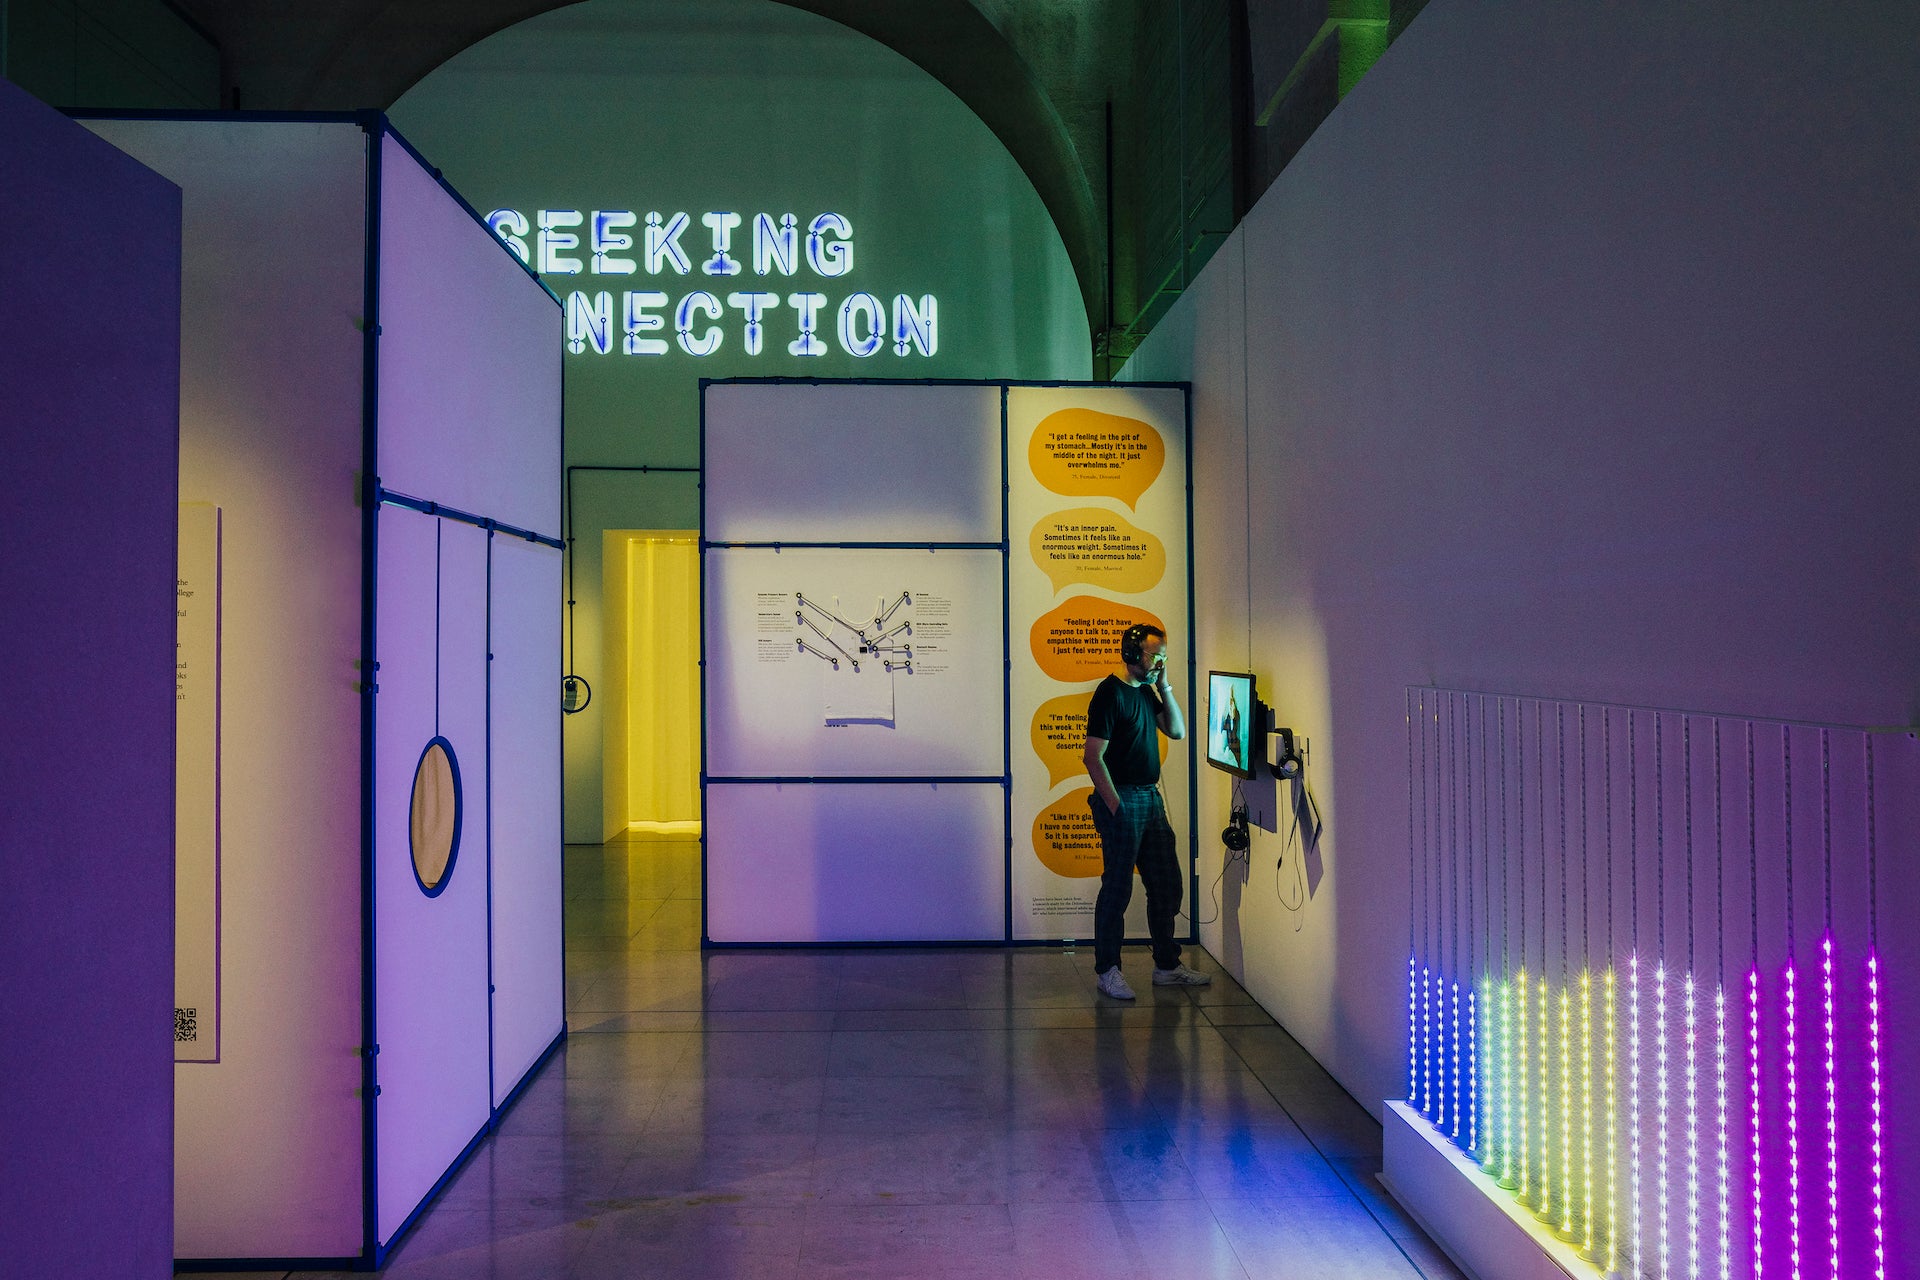 King’s College London’s immersive presentation harnesses digital design and data to explore issues like mental health, vulnerability, autonomy, and privacy. Photo by Taran Wilkhu